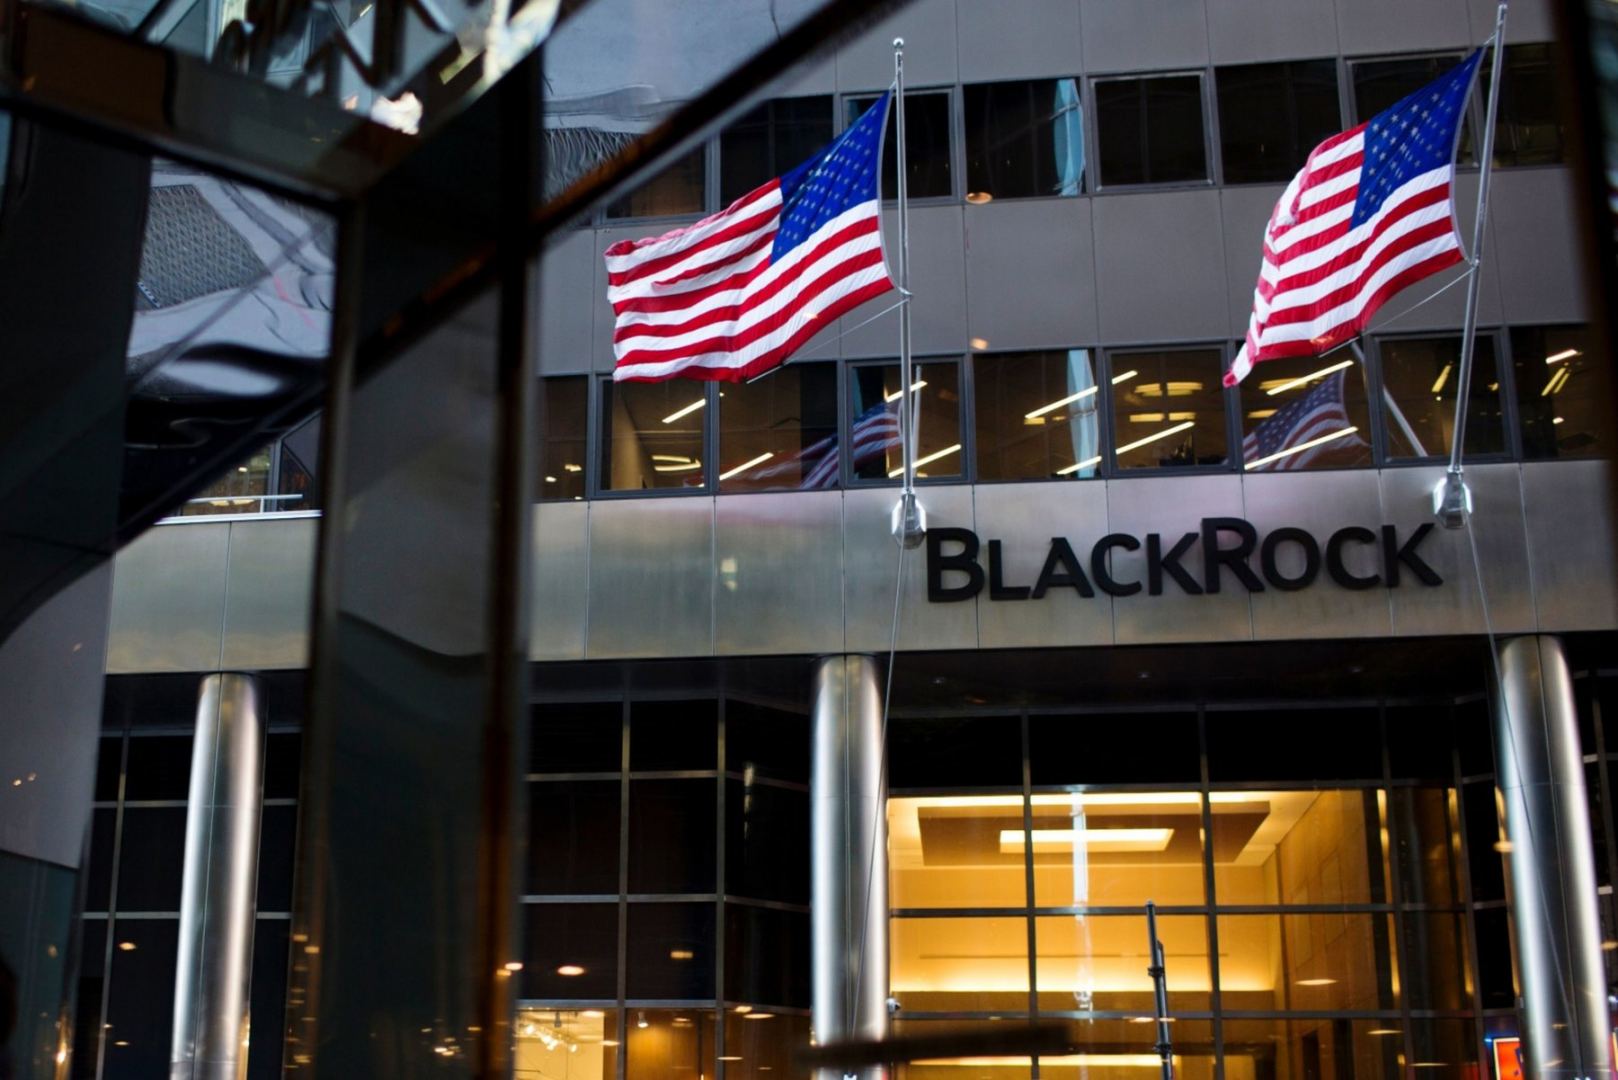 BlackRock builds 5% stake in Toshiba, becomes third largest shareholder